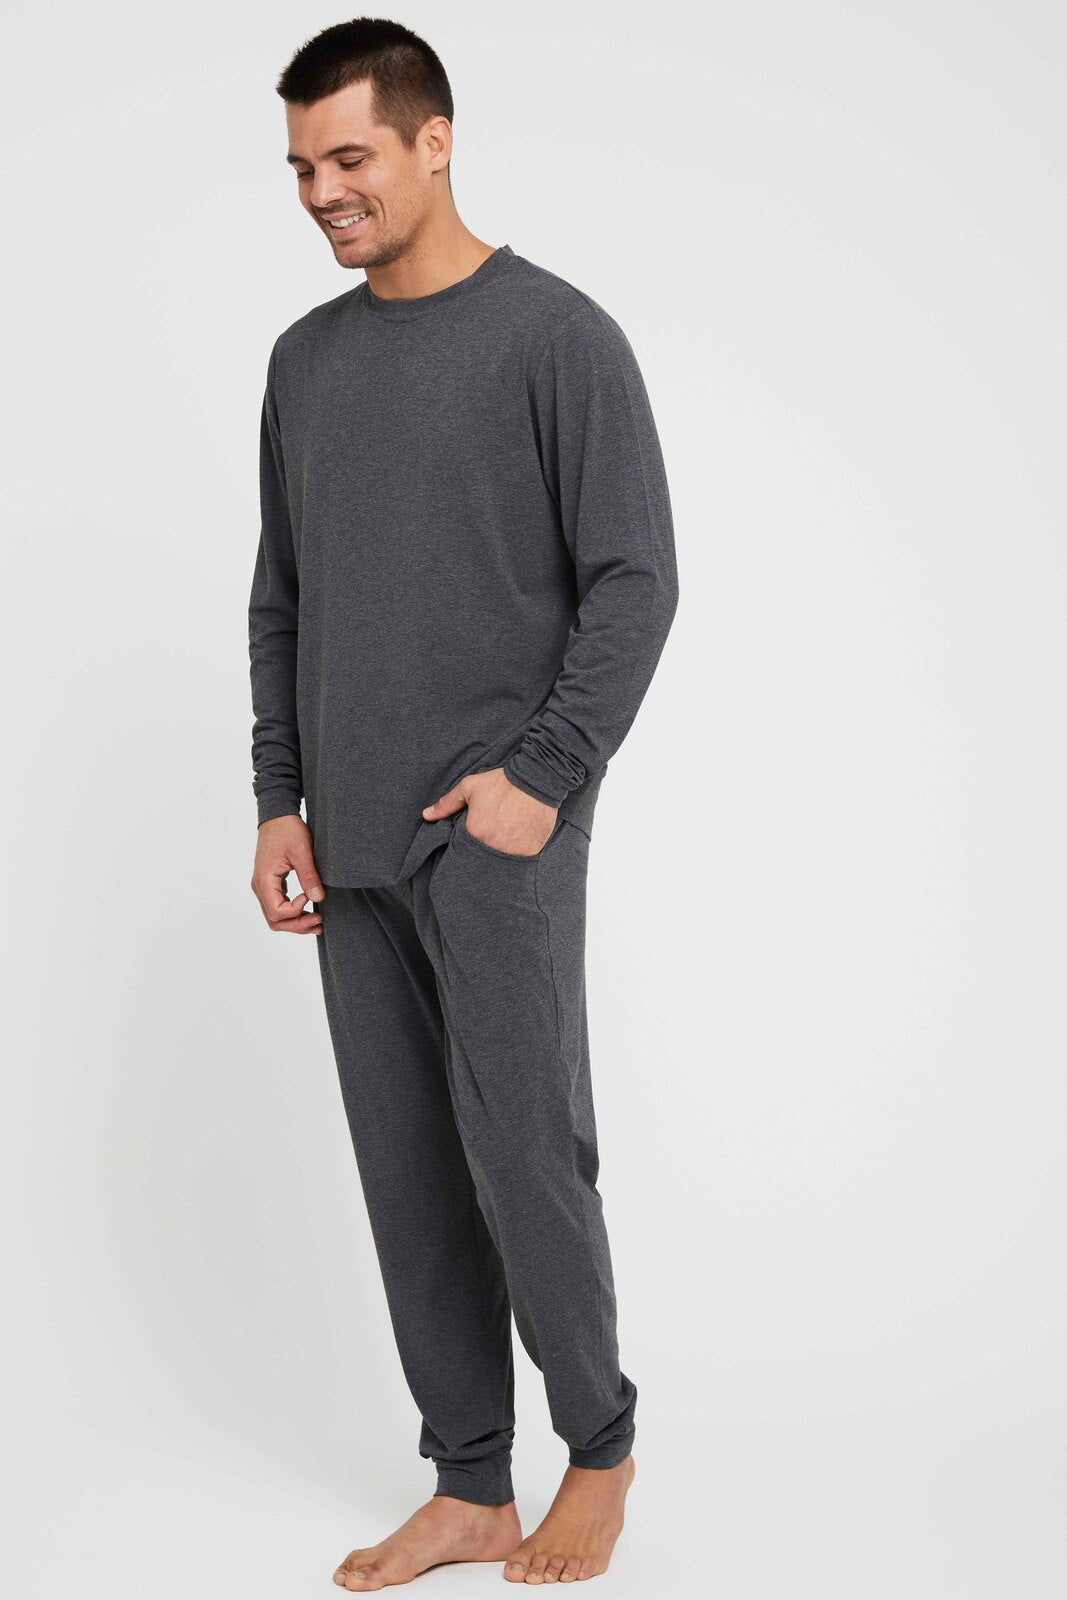 Men's Chill Pant - Charcoal | Bamboo Body